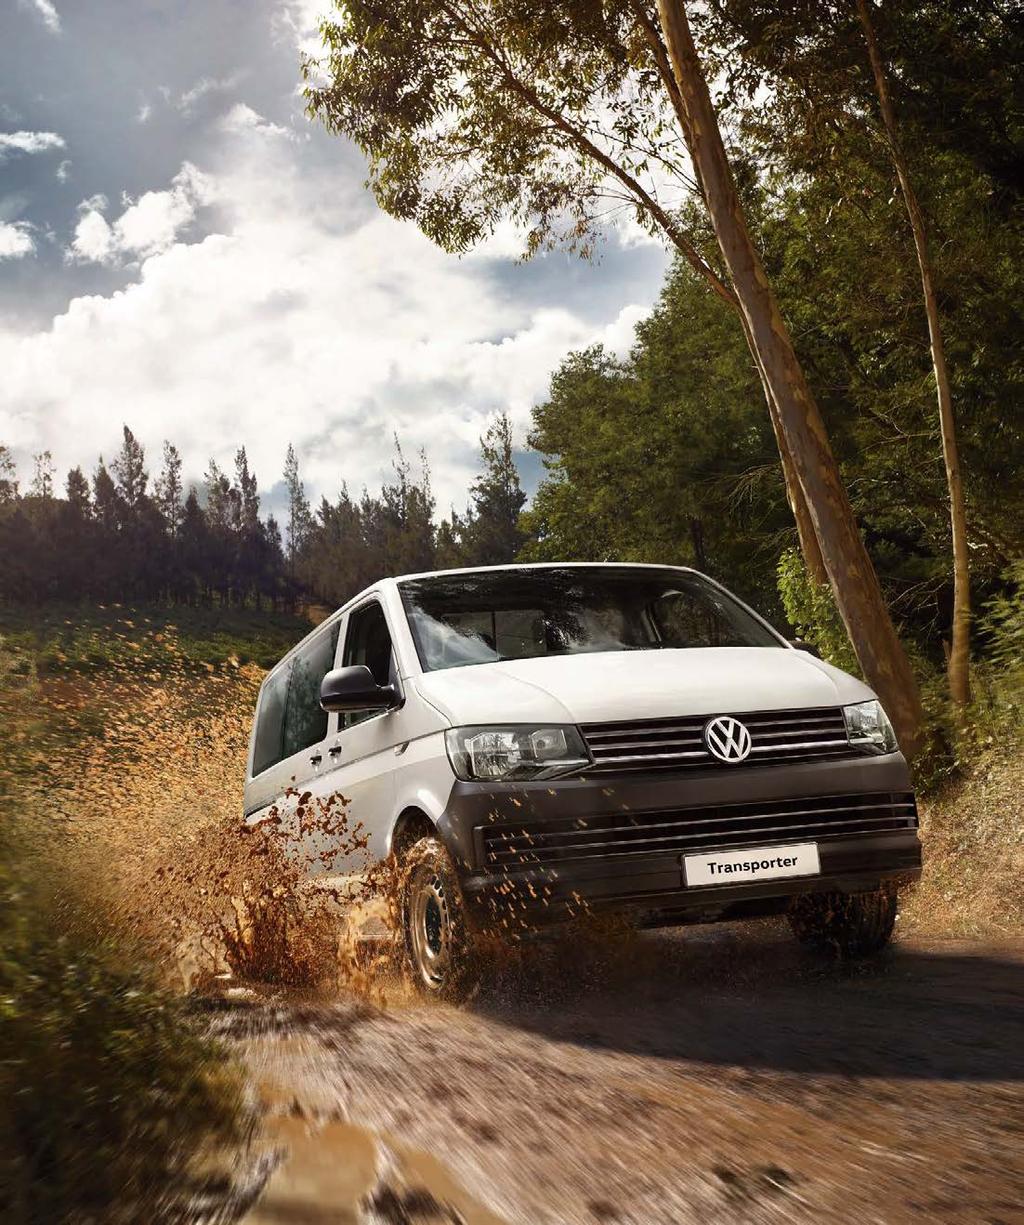 The most off-road-ready vehicle in its class with DSG. The 4MOTION all-wheel drive.